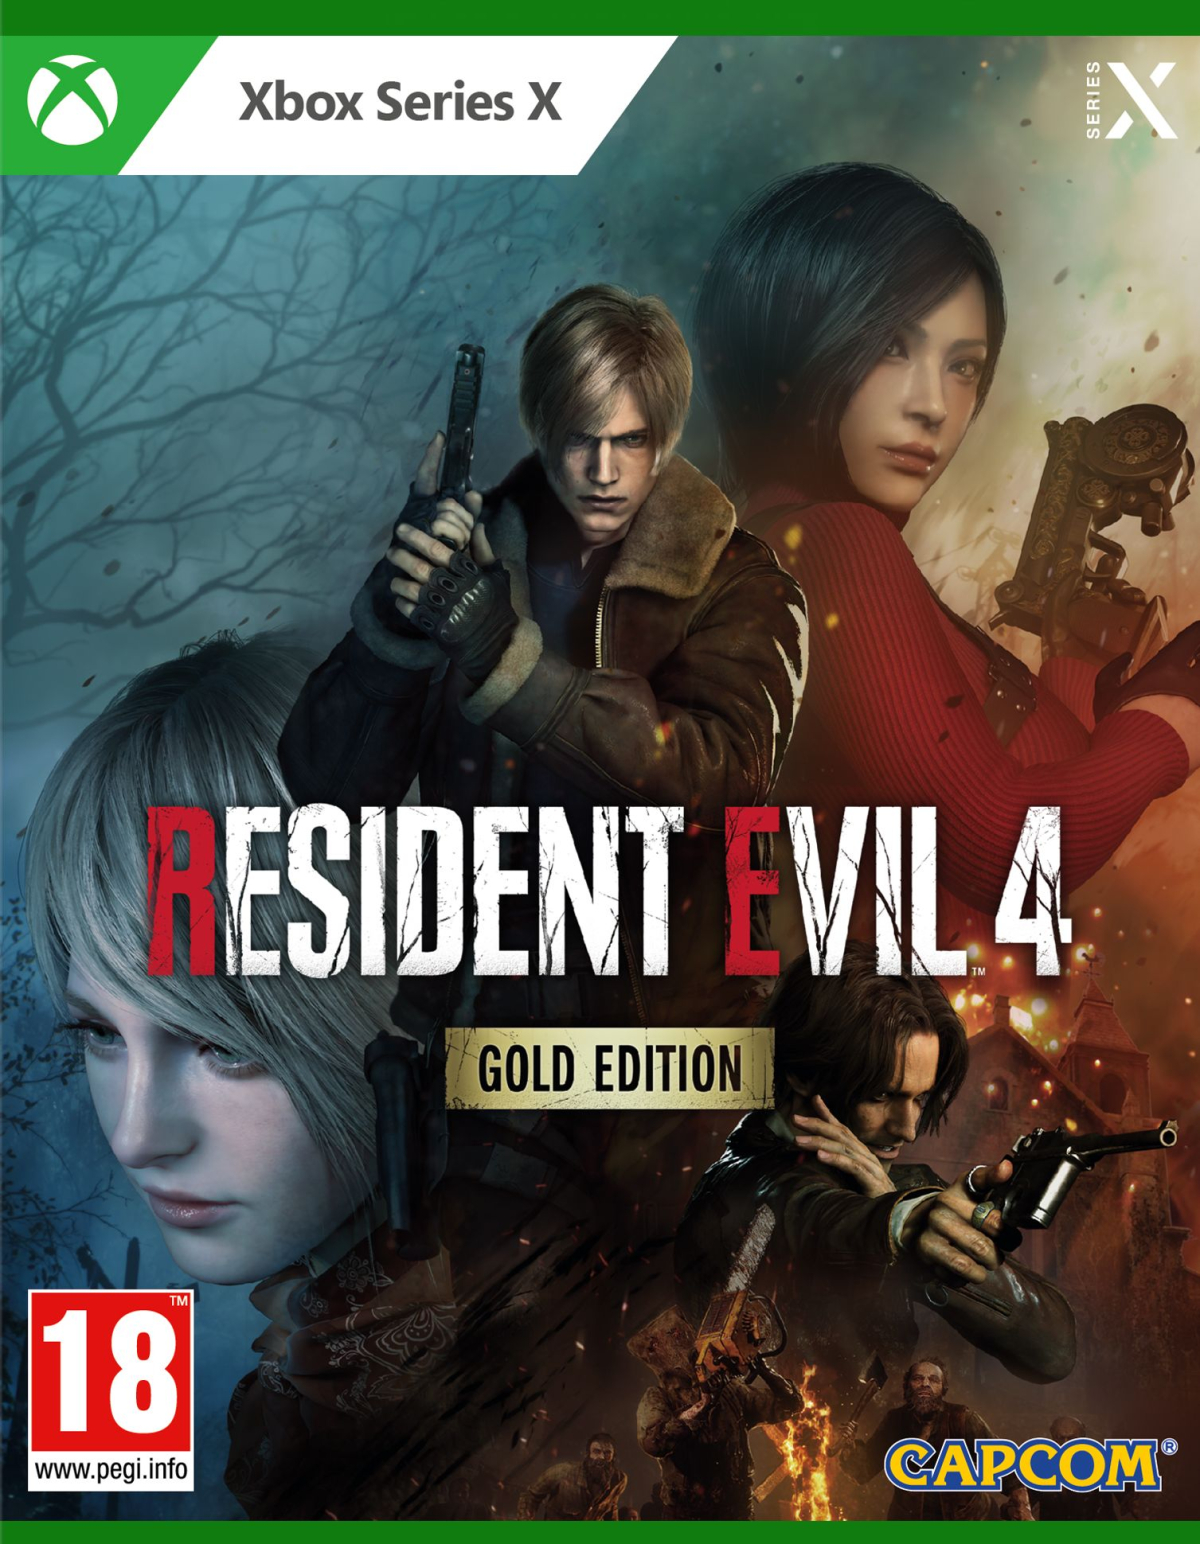 XBOXSeriesX Resident Evil 4 Gold Edition